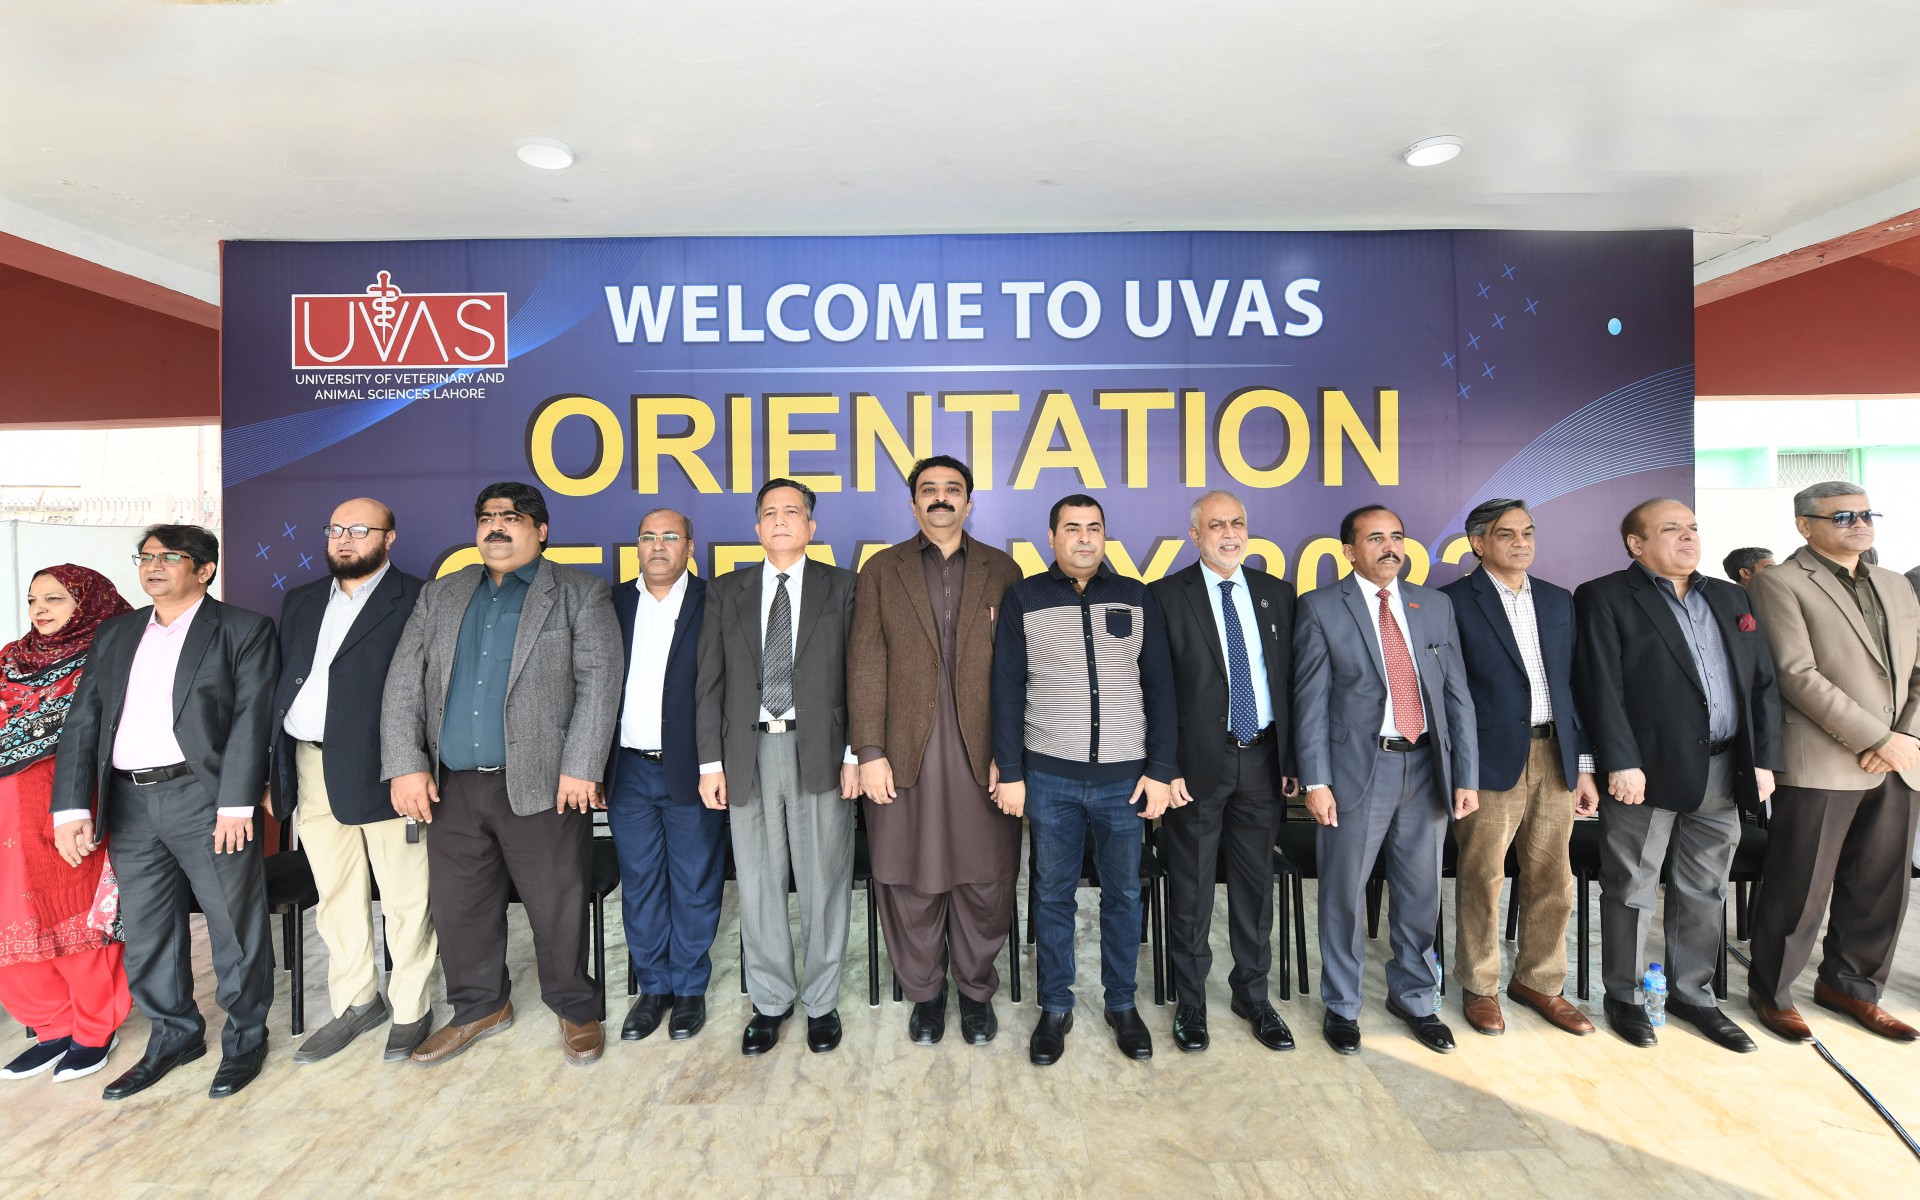 Orientation programme for newly-admitted undergraduate students at UVAS